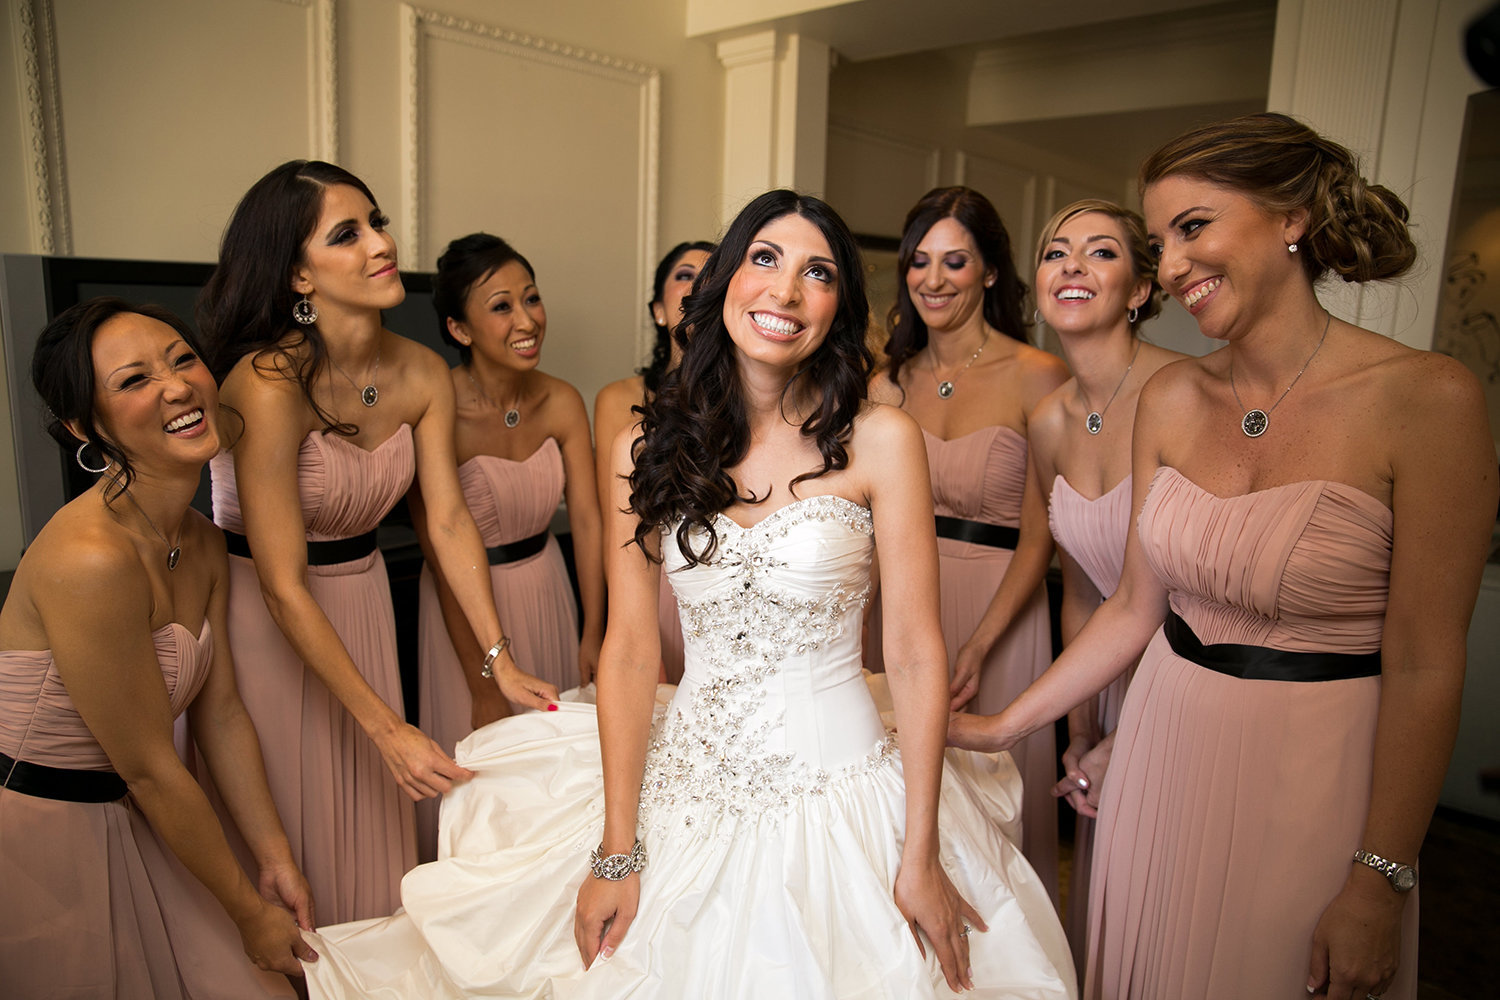 Great natural moment photo of bride and bridesmaids getting ready at a wedding